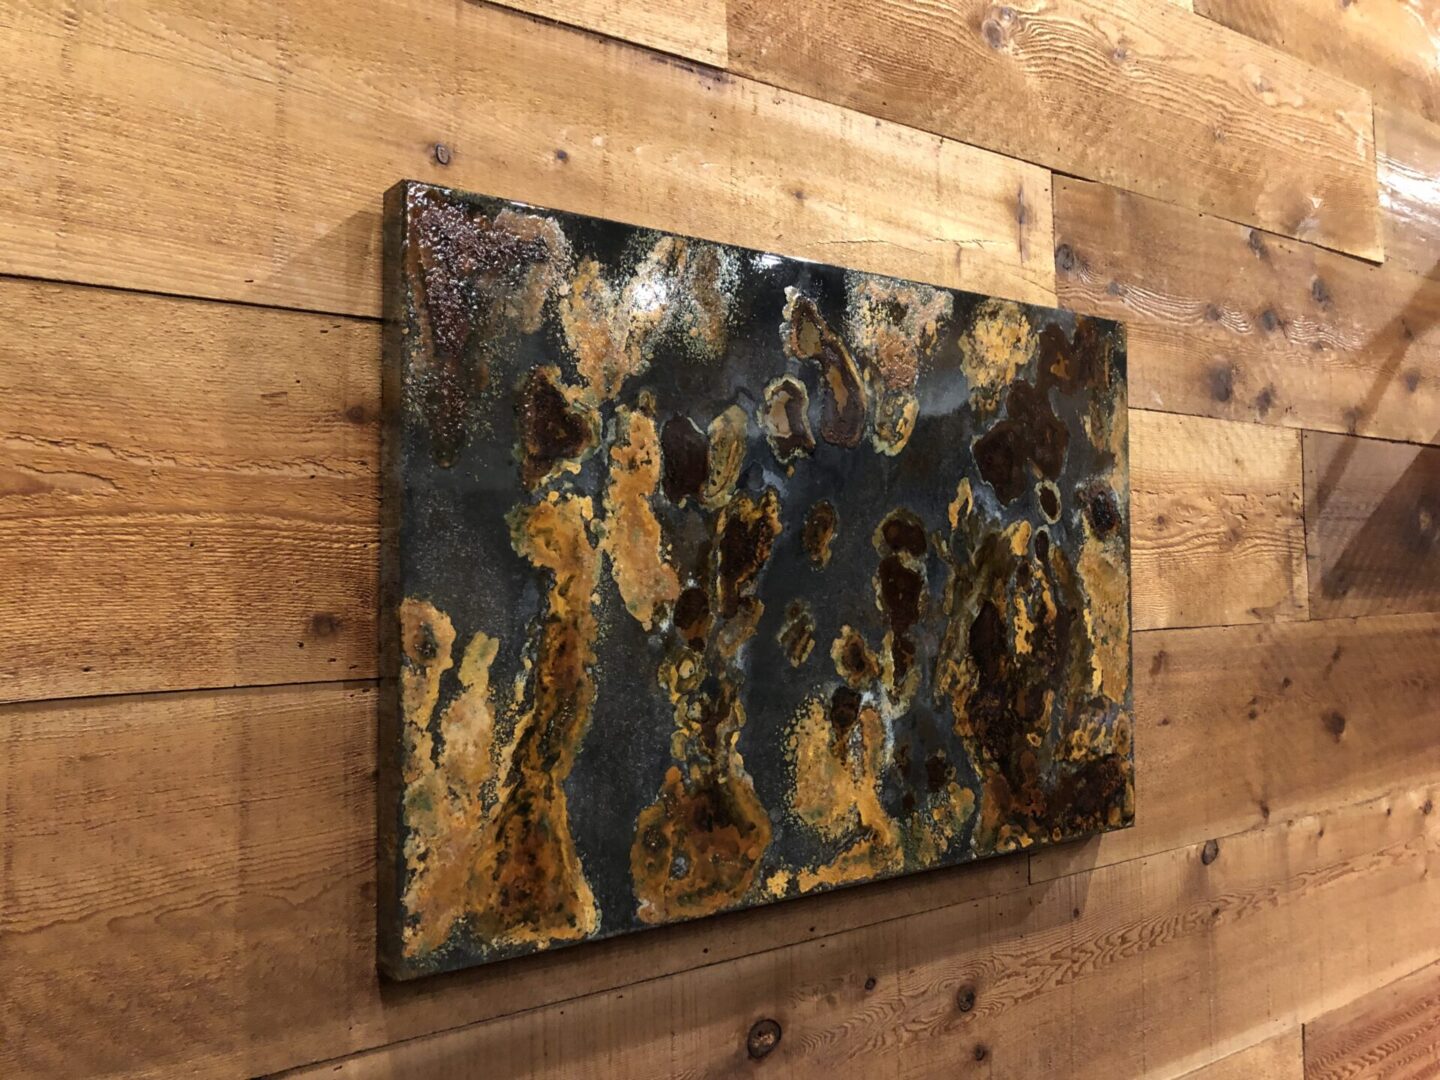 Panoramic view of the Bubbling Rust Wall Art